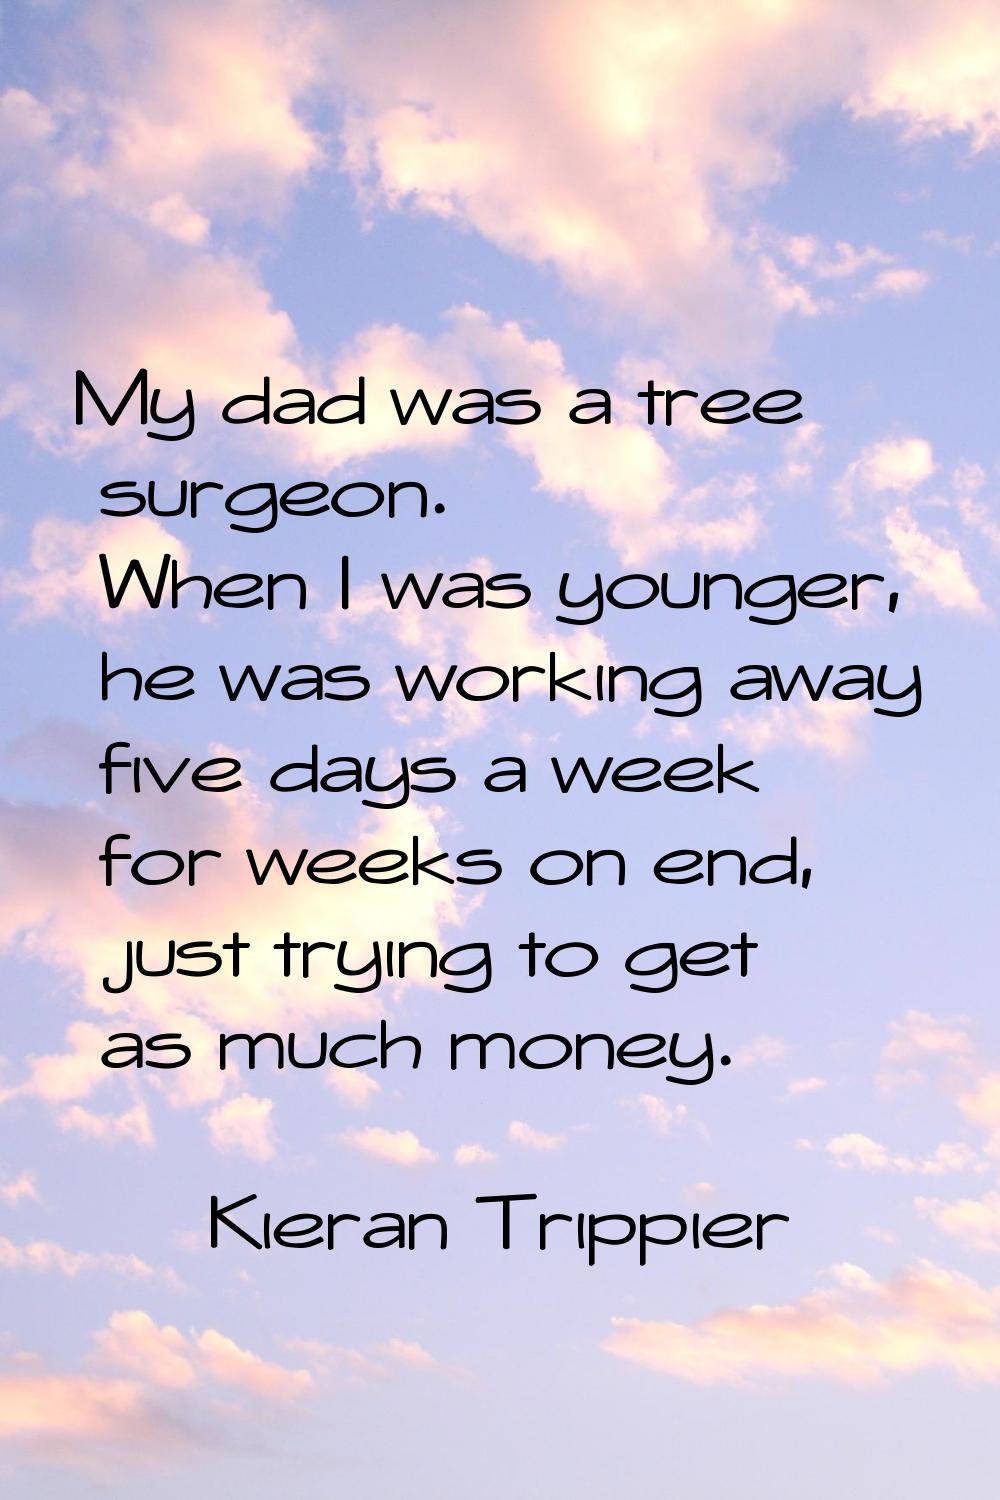 My dad was a tree surgeon. When I was younger, he was working away five days a week for weeks on en